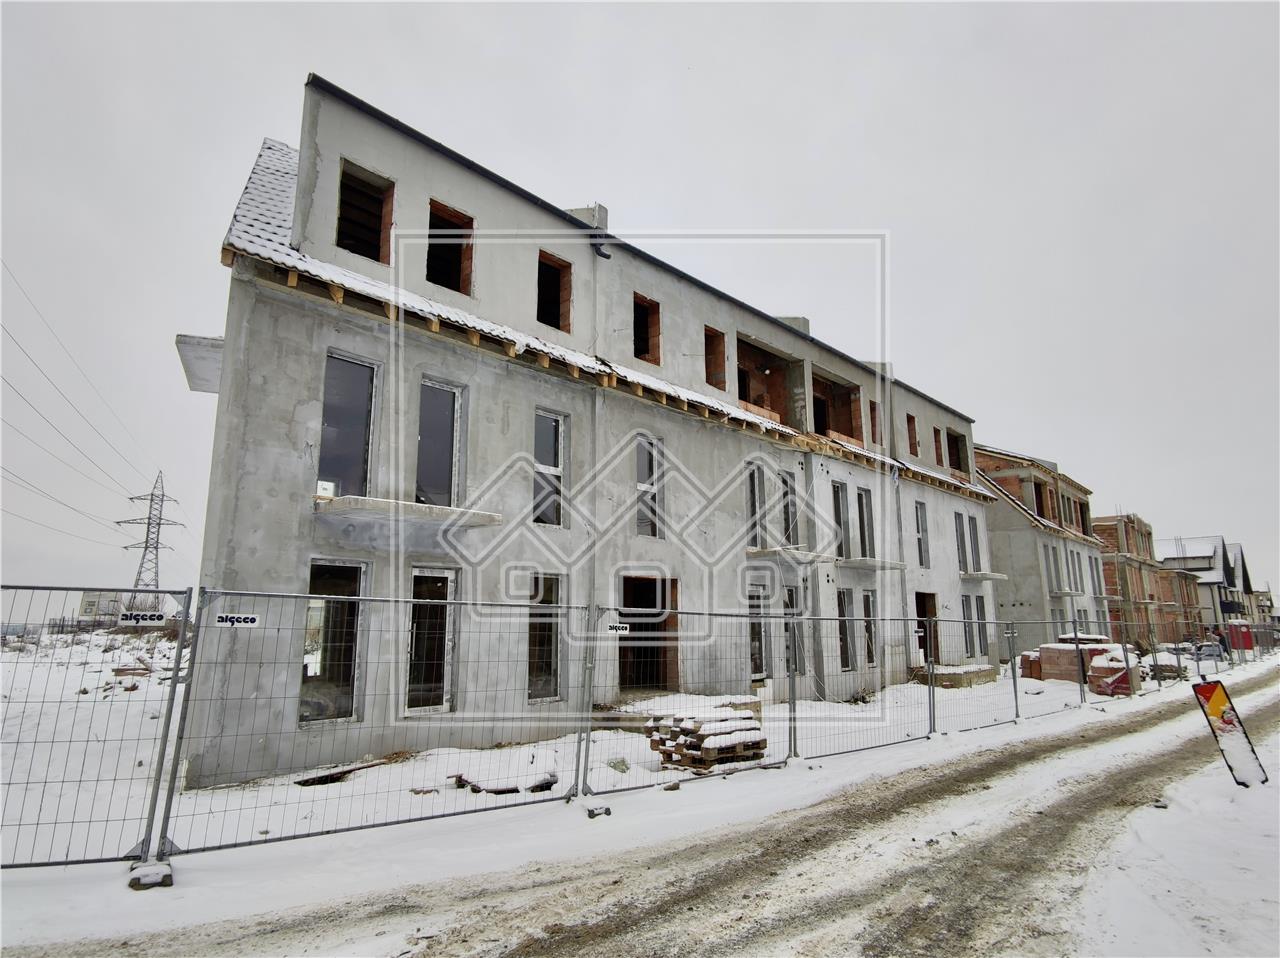 The Ambiental Residential apartment complex - Sibiu Real Estate